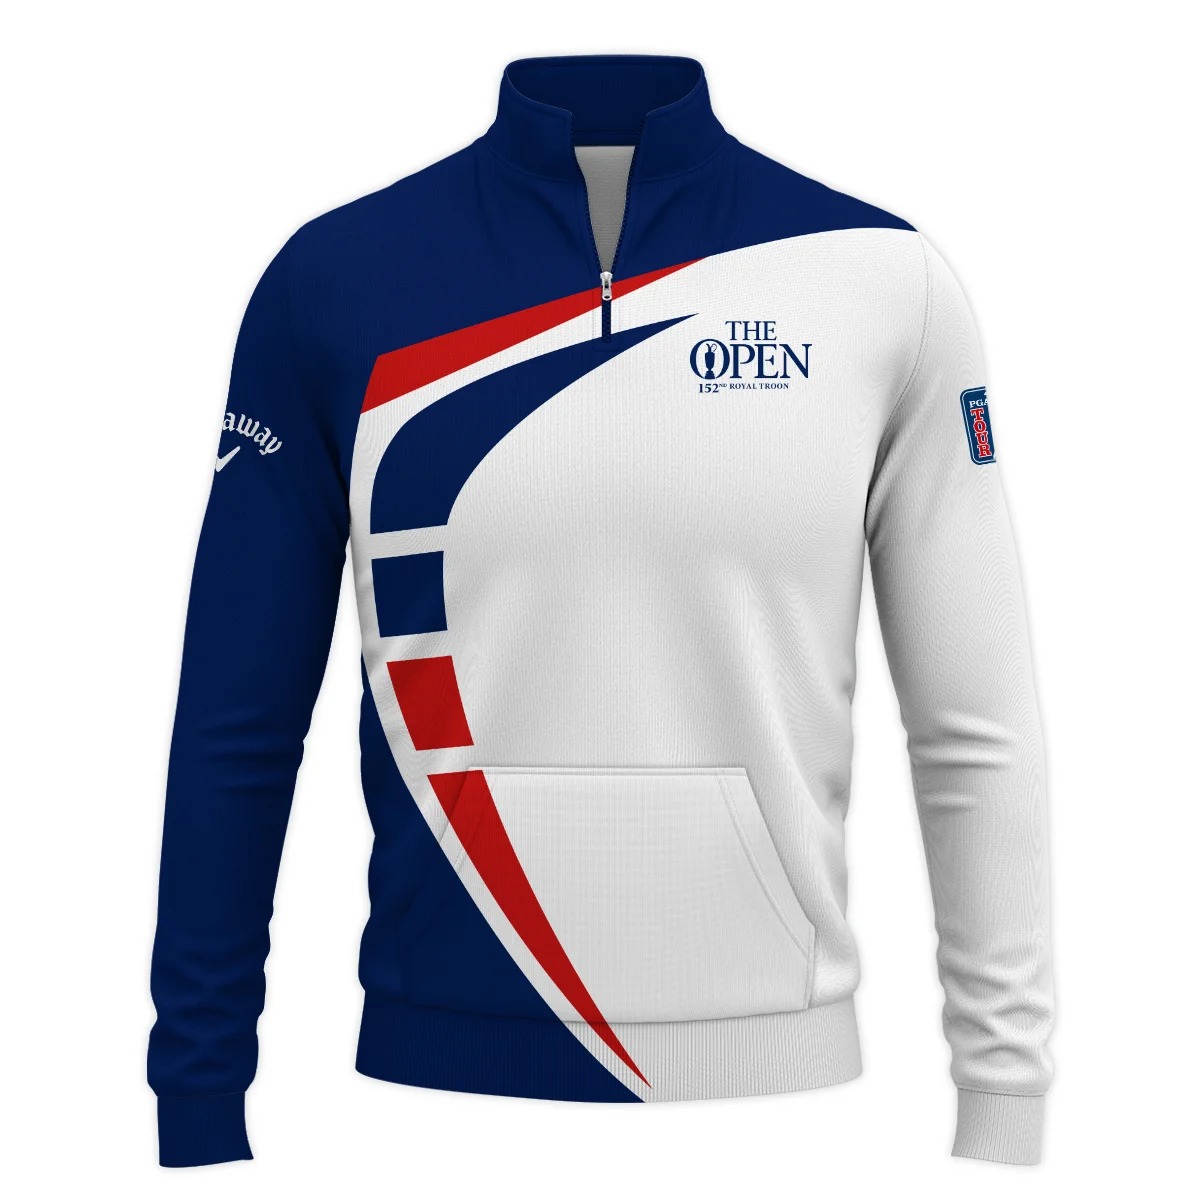 152nd Open Championship Callaway White Blue Red Pattern Background Performance Quarter Zip Sweatshirt With Pockets All Over Prints HOTOP270624A03CLWTS